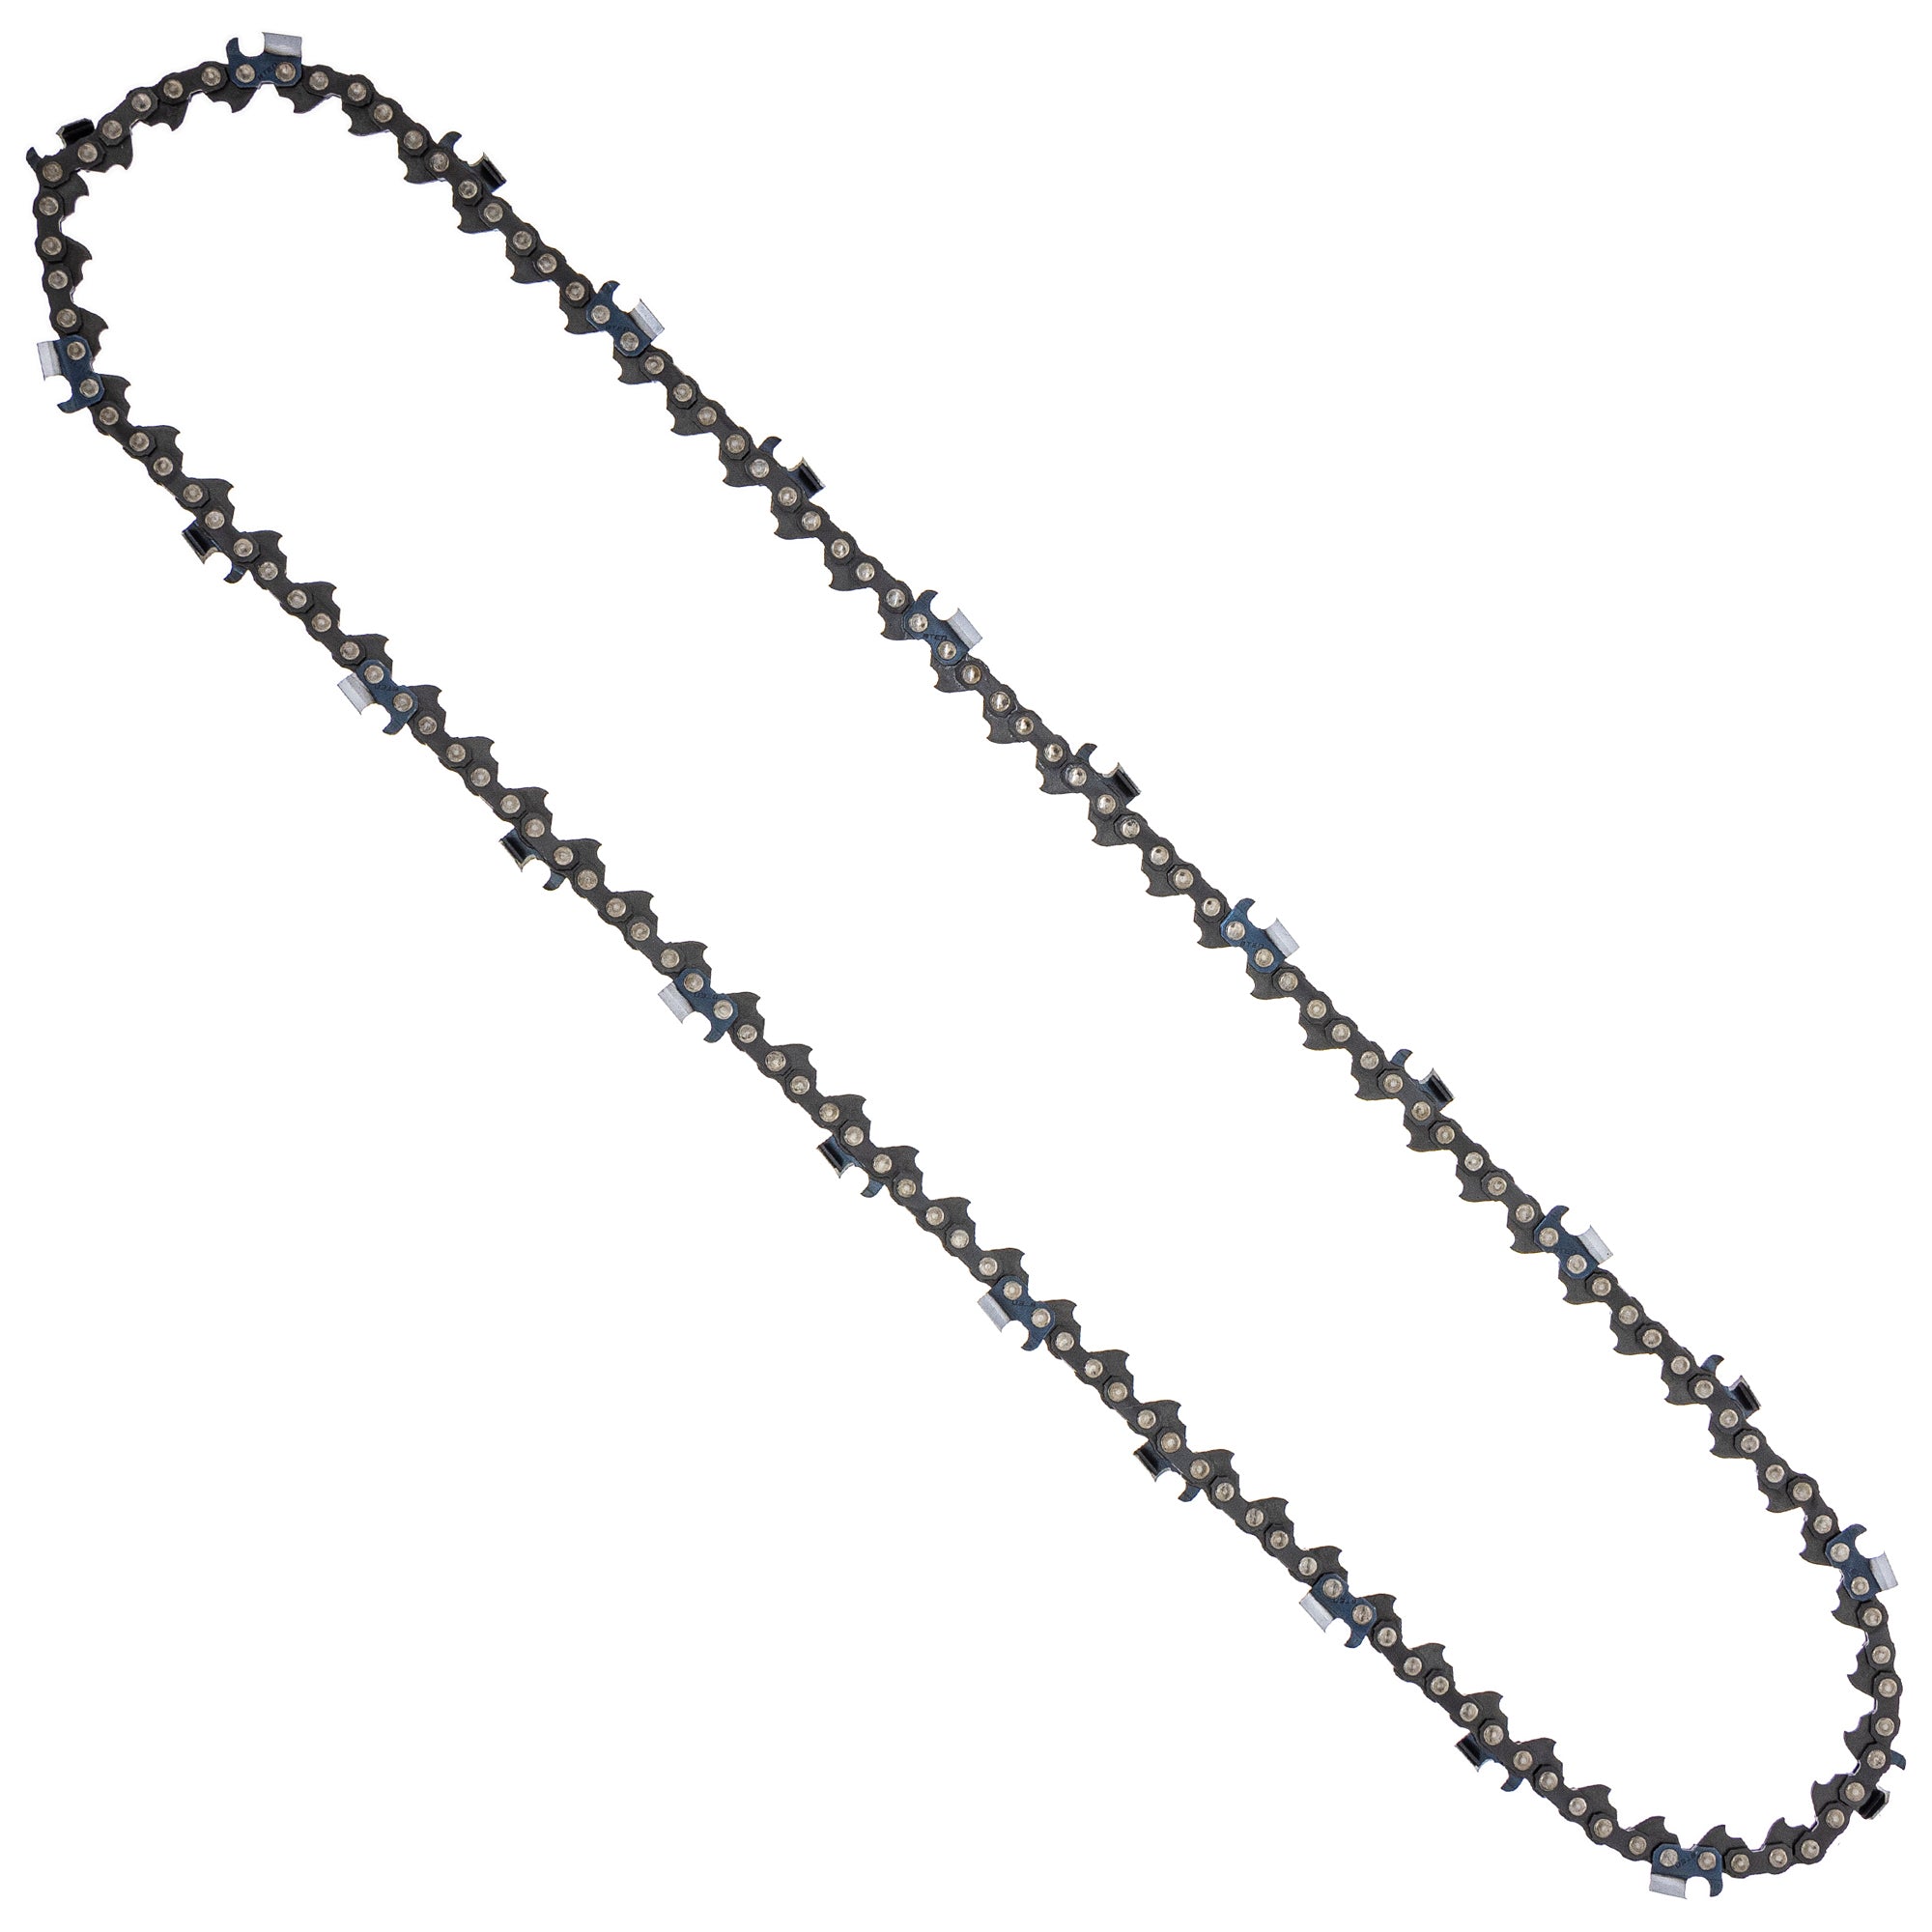 8TEN 810-CCC2290H Chain 2-Pack for zOTHER Oregon Husqvarna Poulan